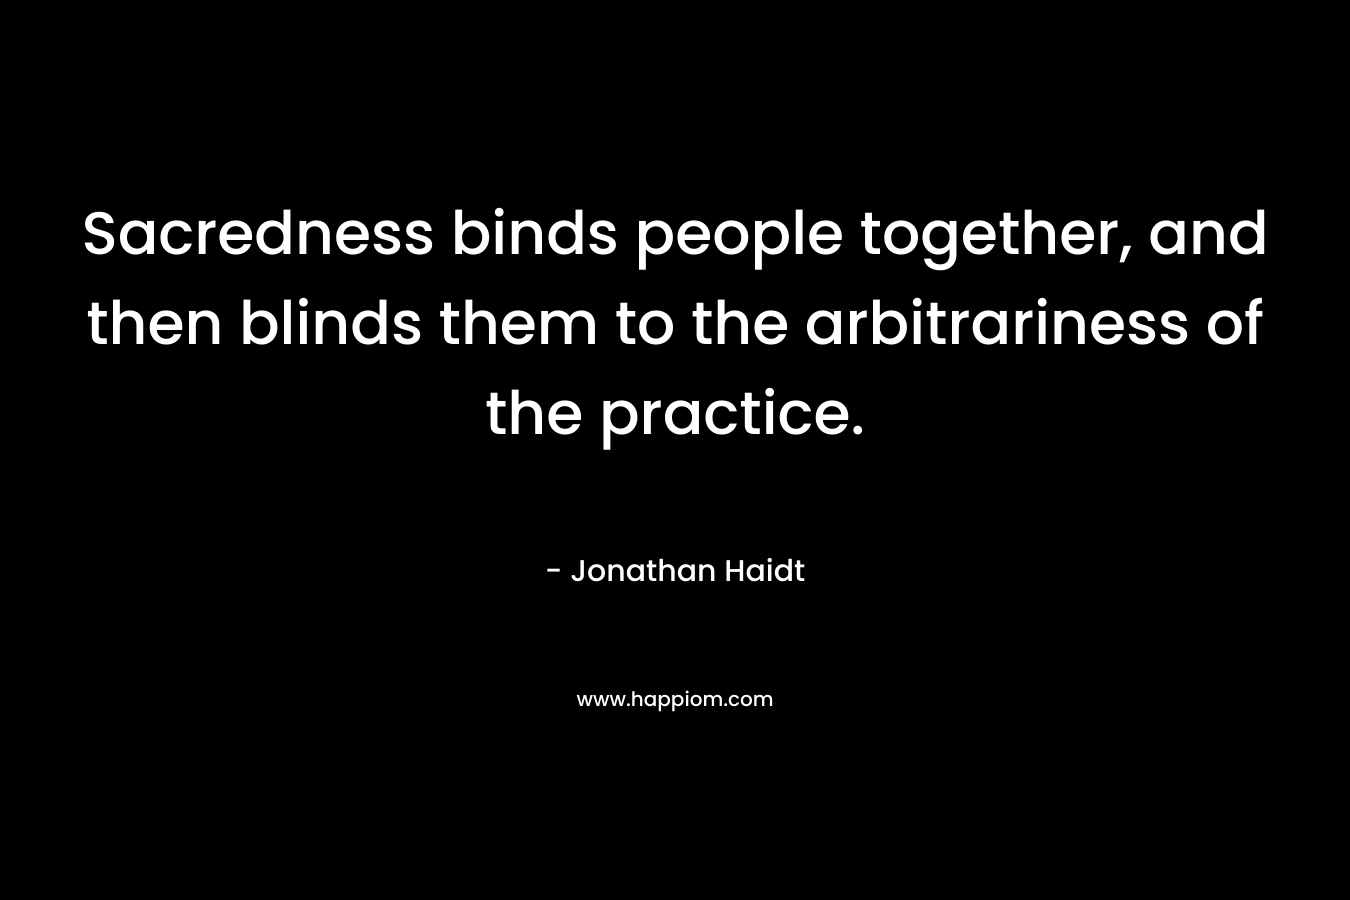 Sacredness binds people together, and then blinds them to the arbitrariness of the practice. – Jonathan Haidt